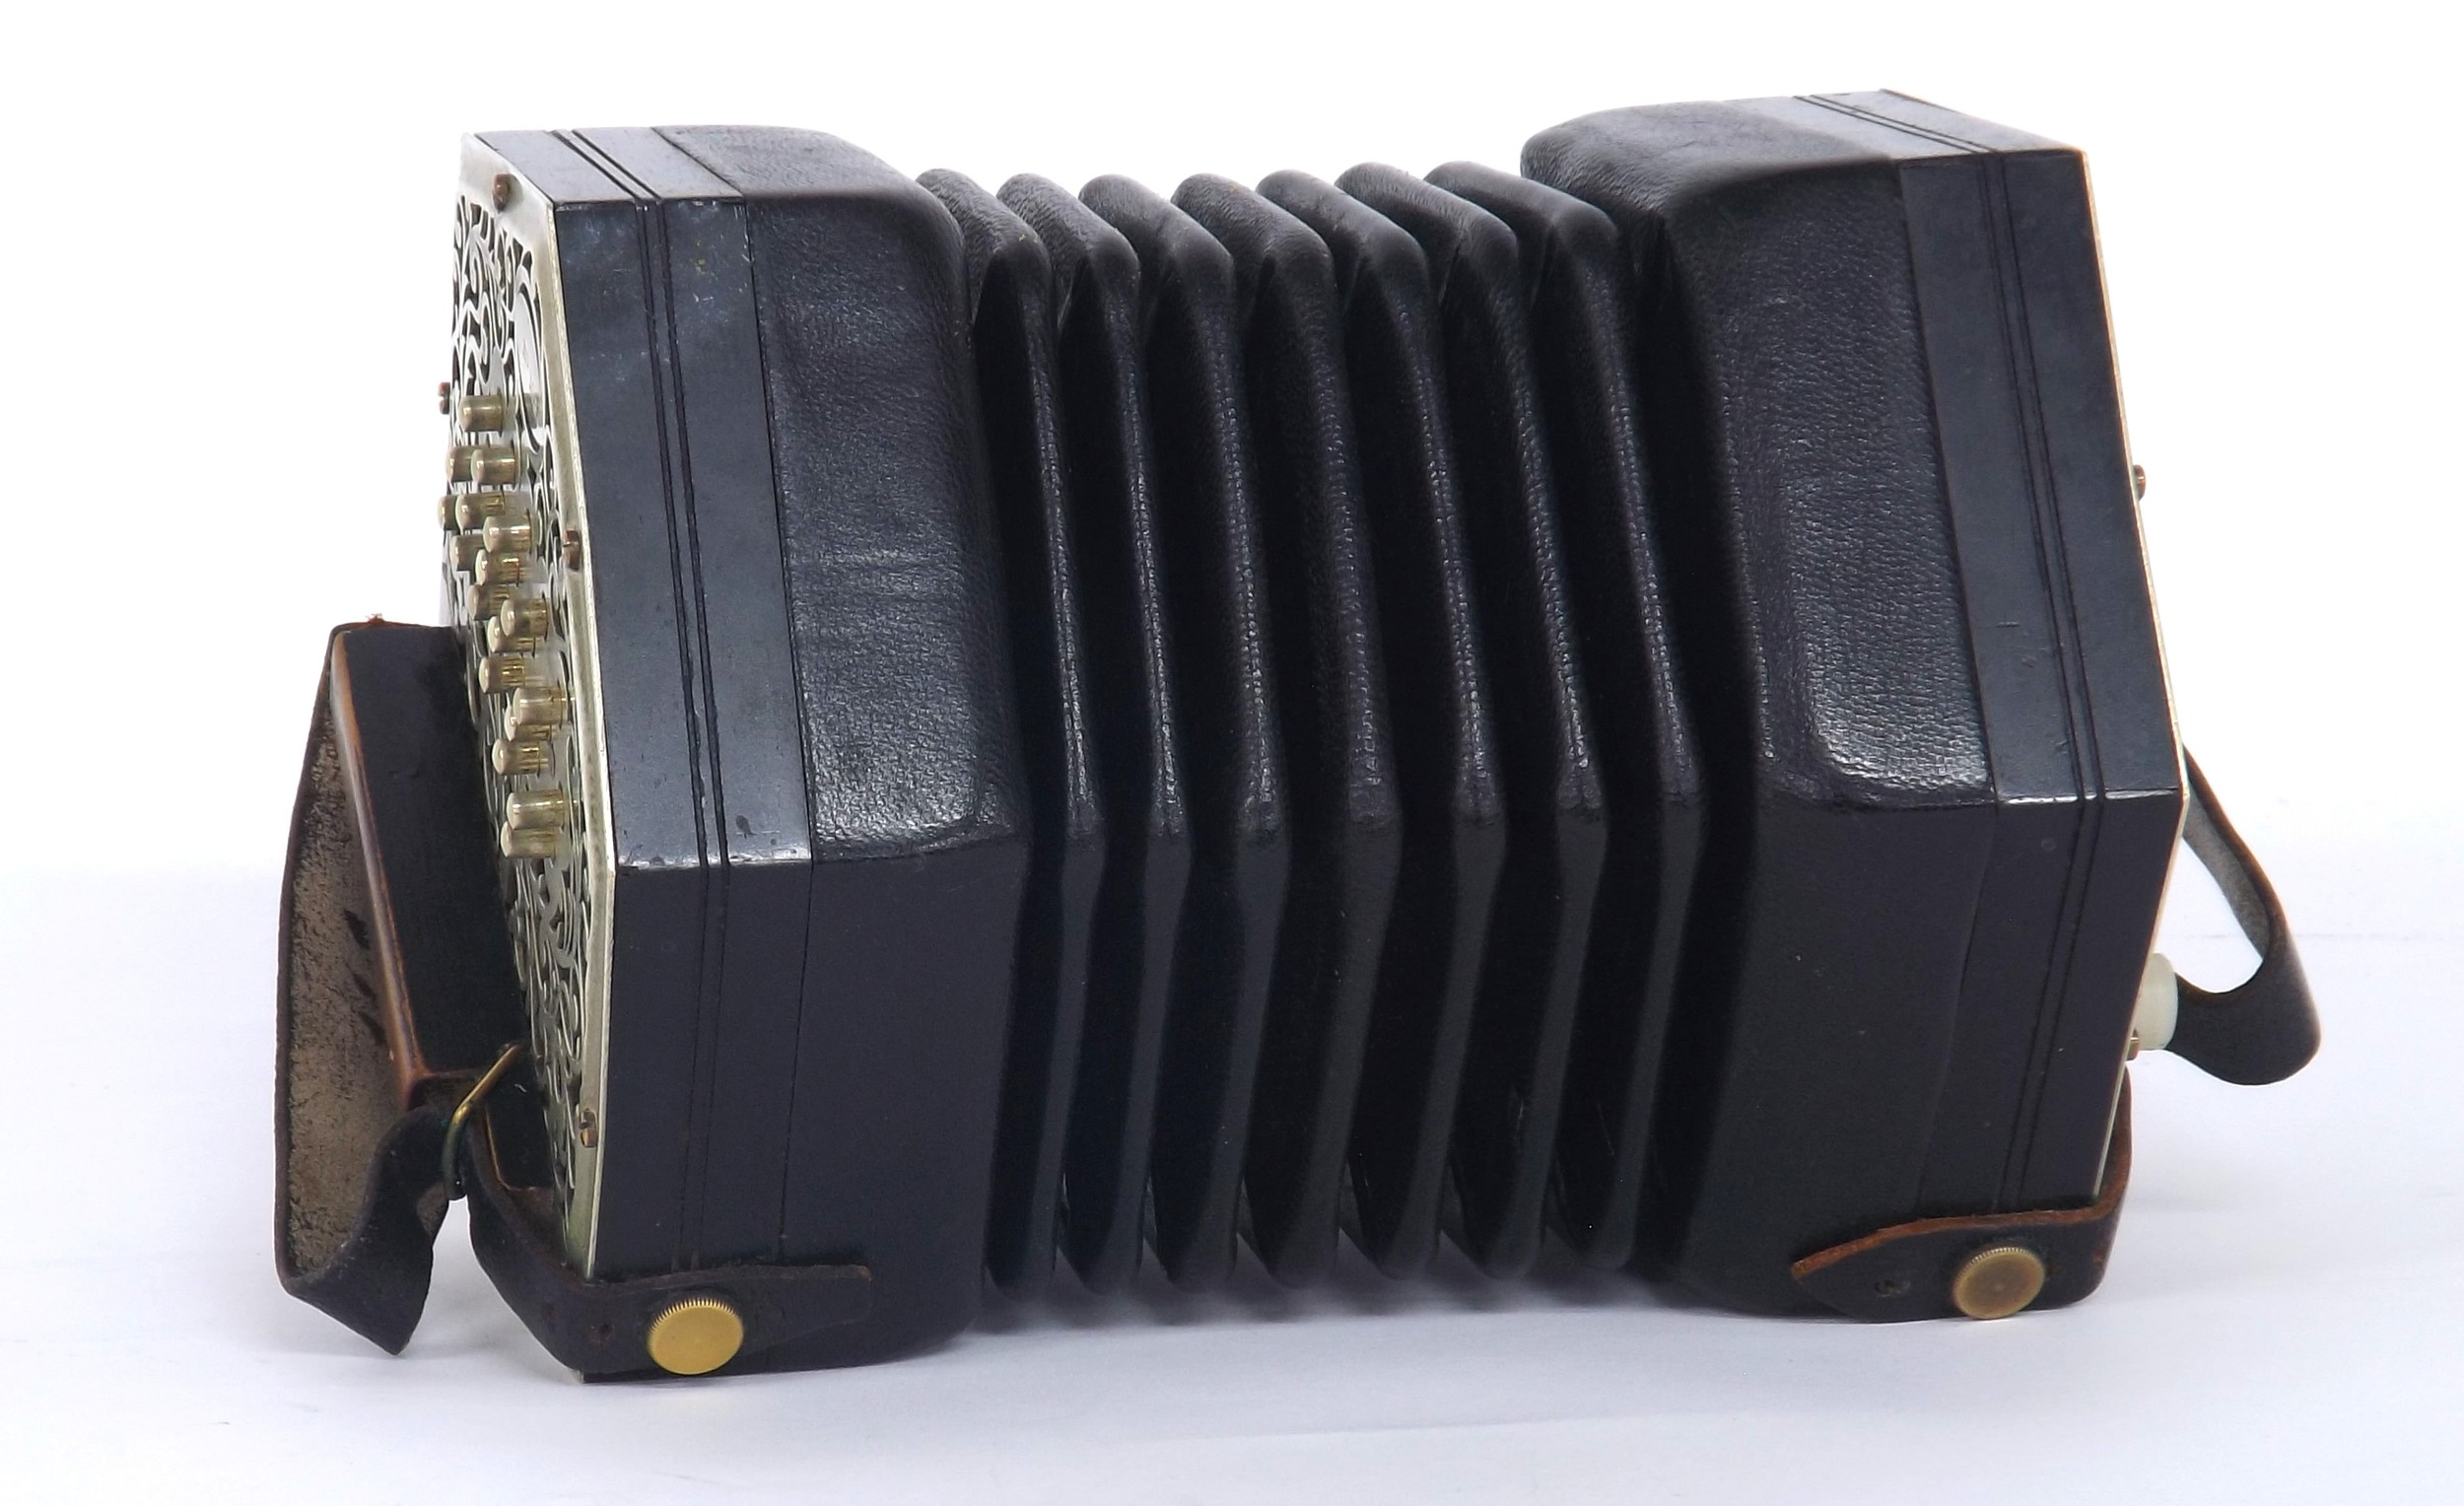 Fine Anglo concertina by and labelled Colin Dipper, no. 103, with thirty-four metal buttons on - Image 4 of 6